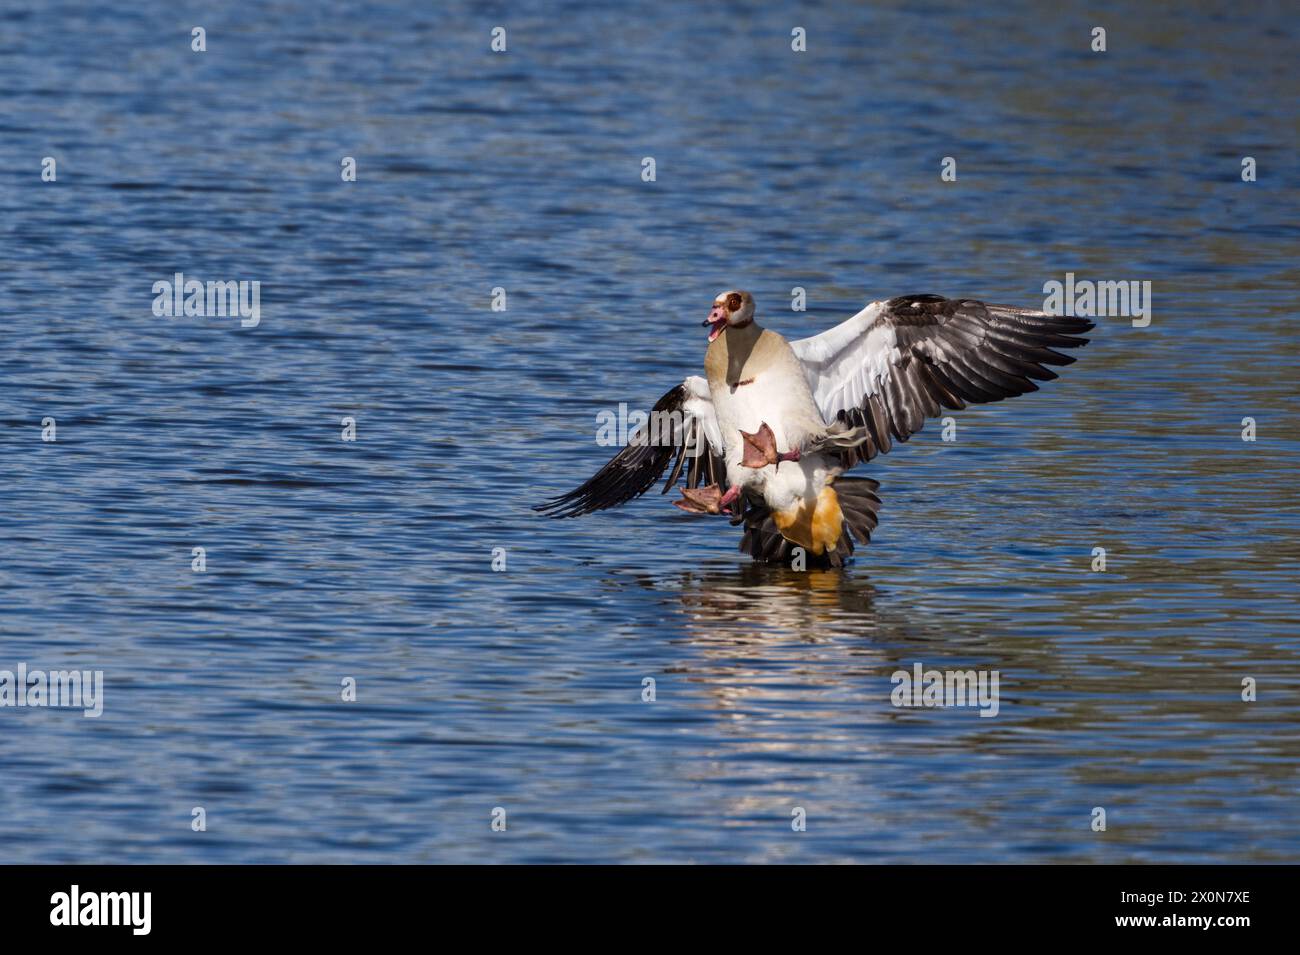 Male Egyptian goose landing on the water with wings spread and feet in the air Stock Photo